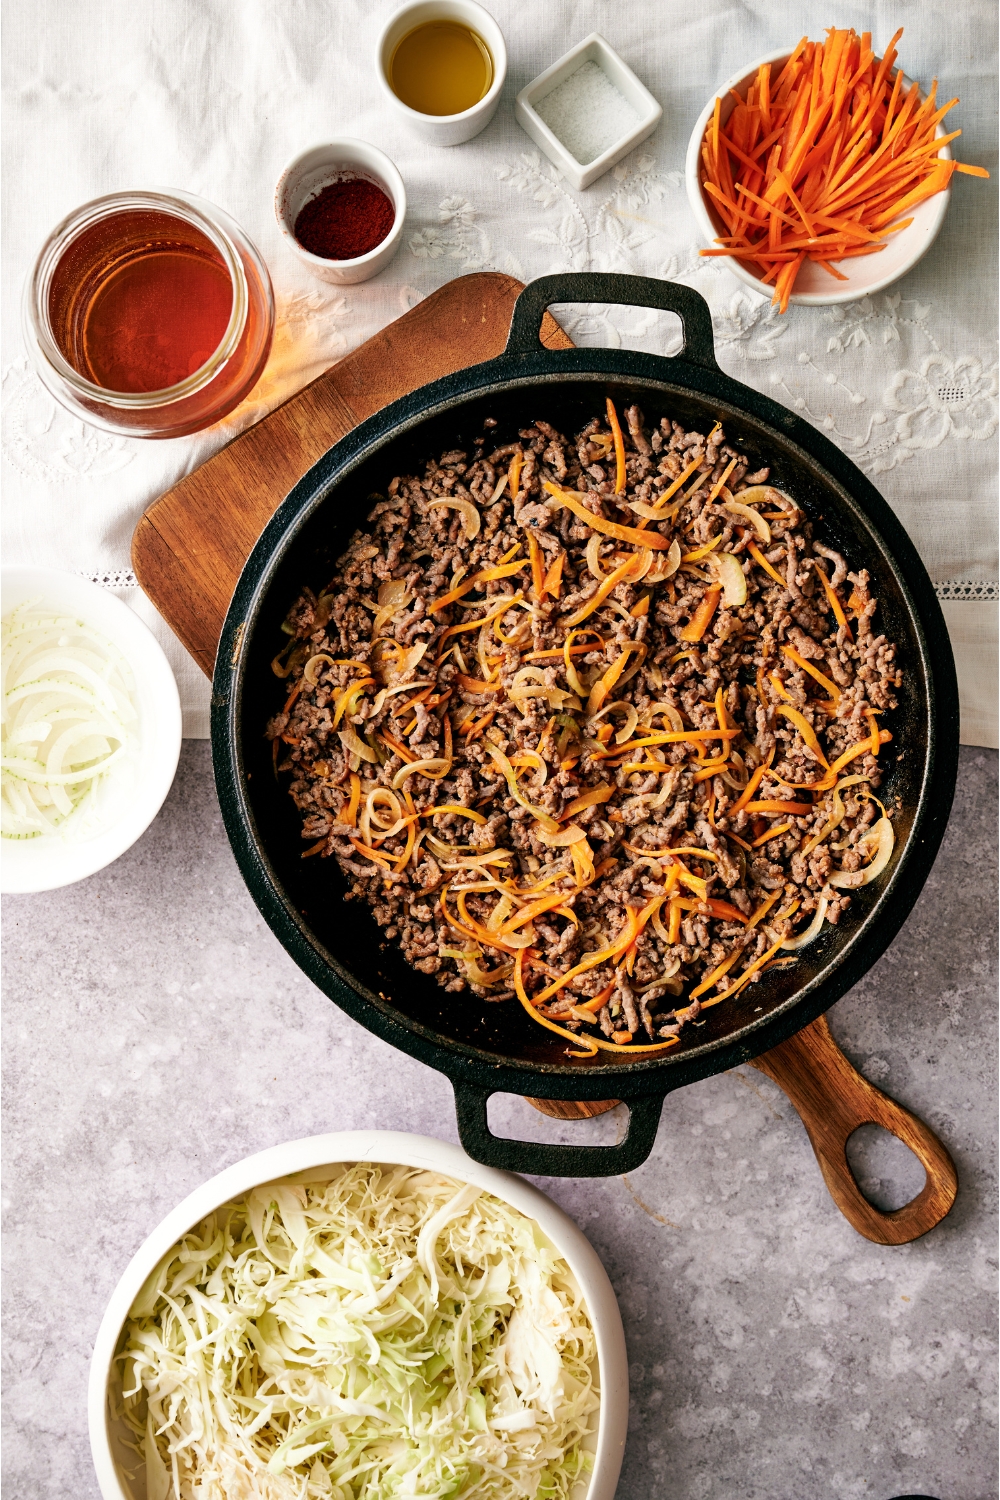 A black skillet filled with cooked ground beef, thinly sliced carrot and onion all mixed together. The skillet is on a wooden board and is surrounded by an assortment of ingredients.